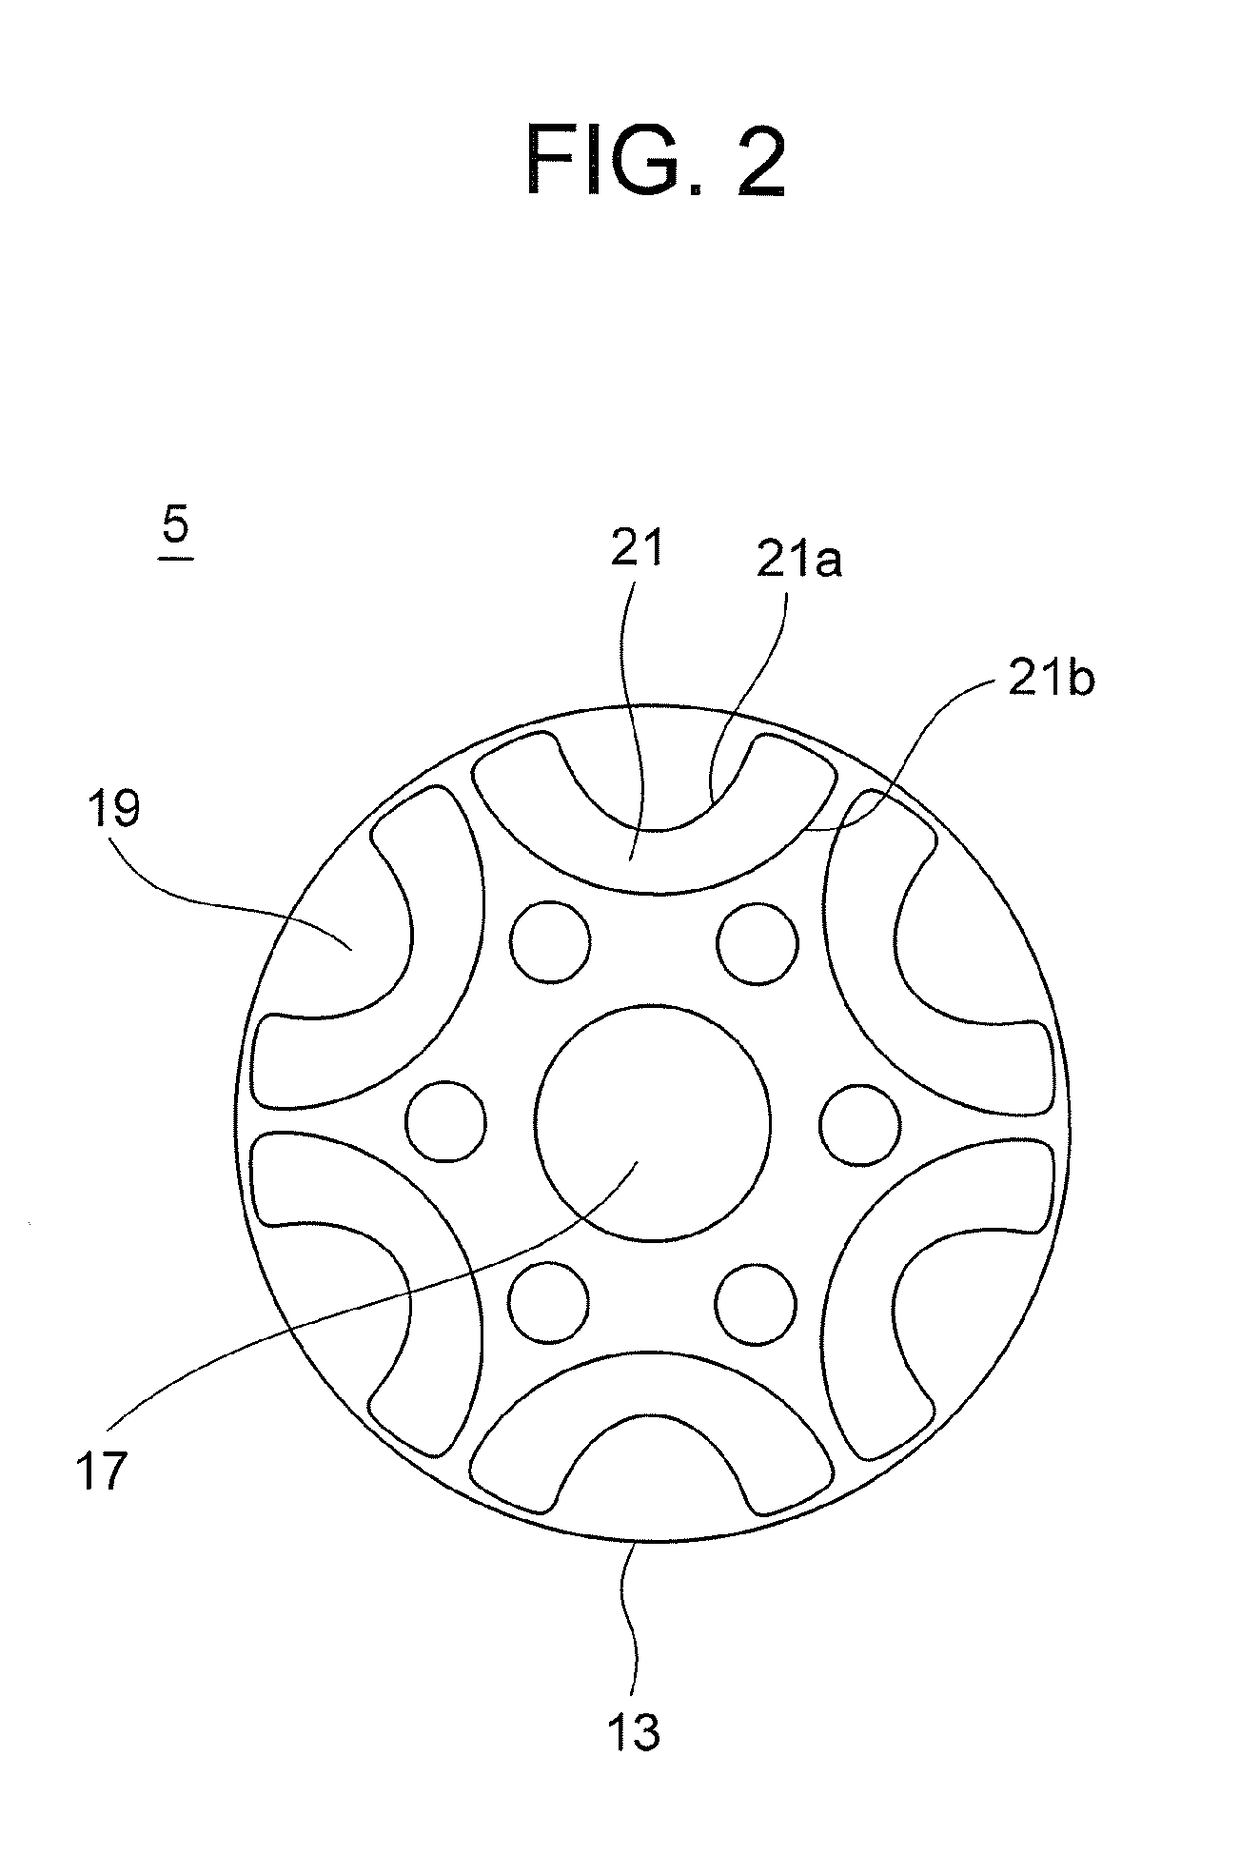 Electric motor with a permanent magnet embedded rotor with curved magnets and magnet accommodation holes of varying radiuses